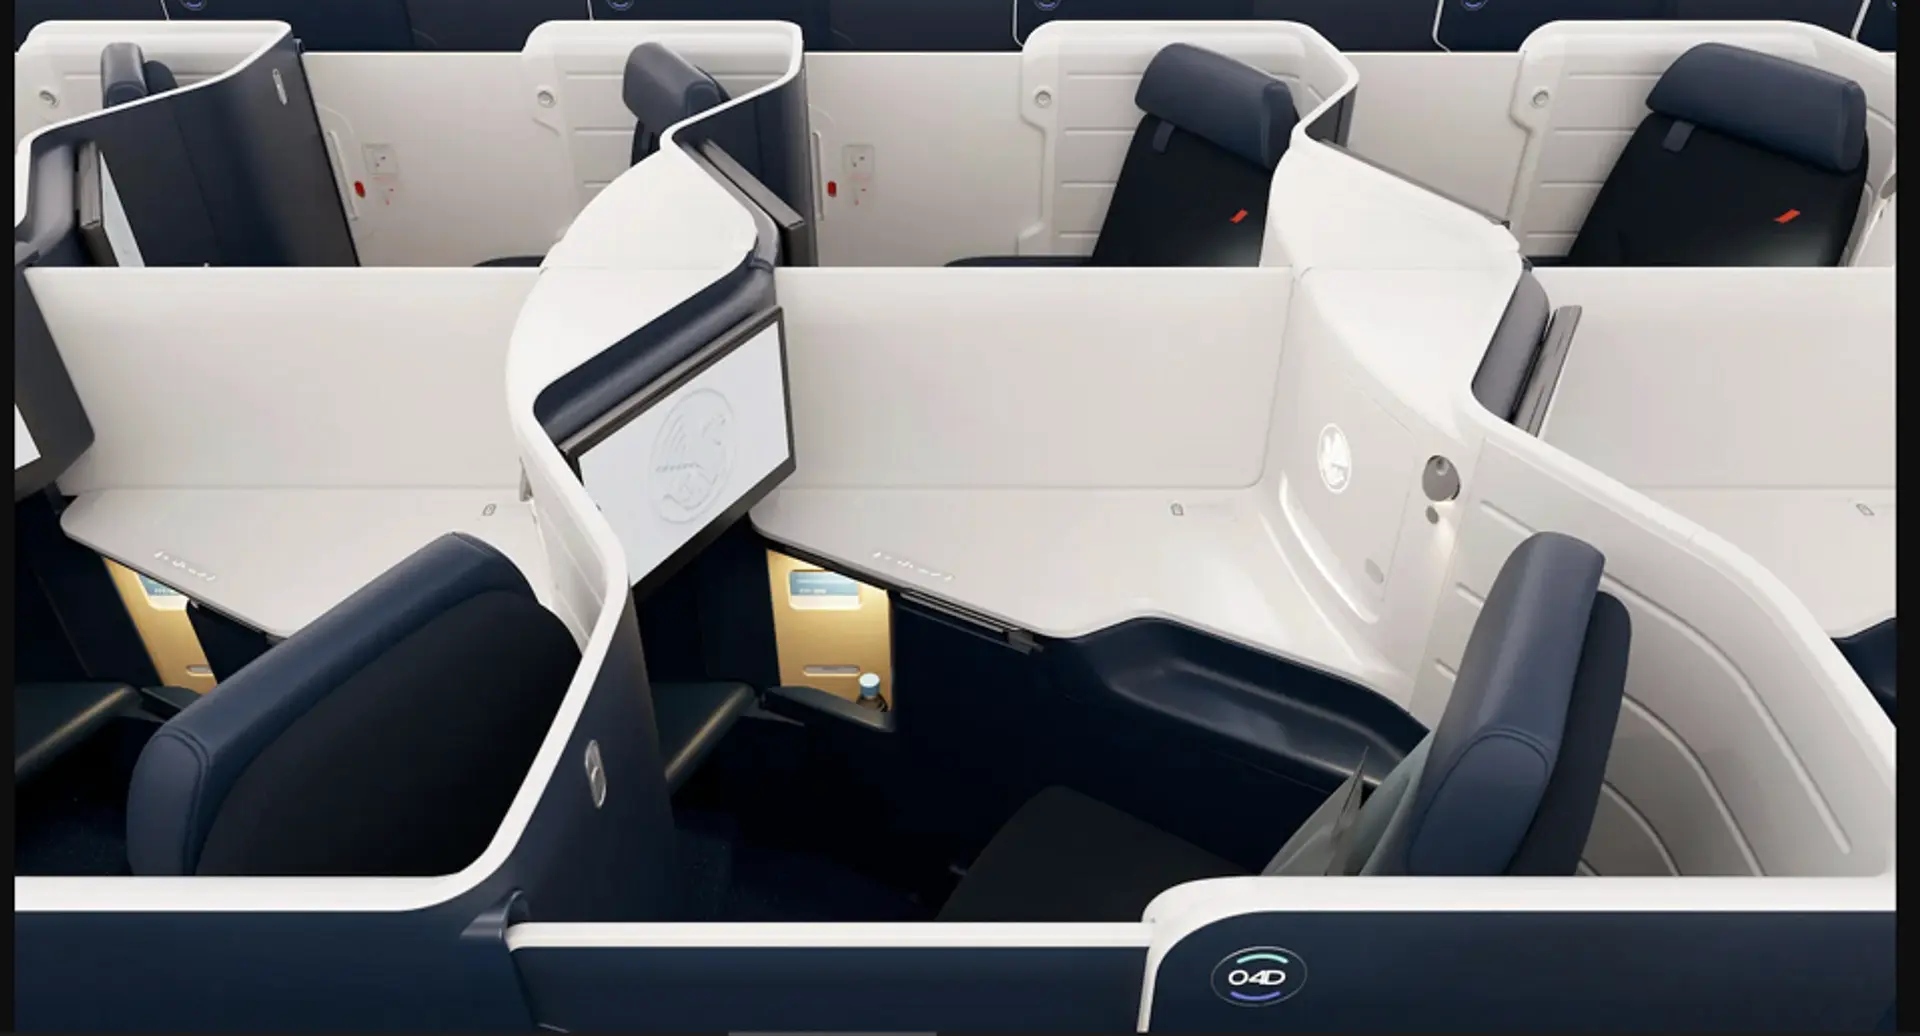 Airlines News - Air France flies new Business Class on long-haul Boeing 777-300ER